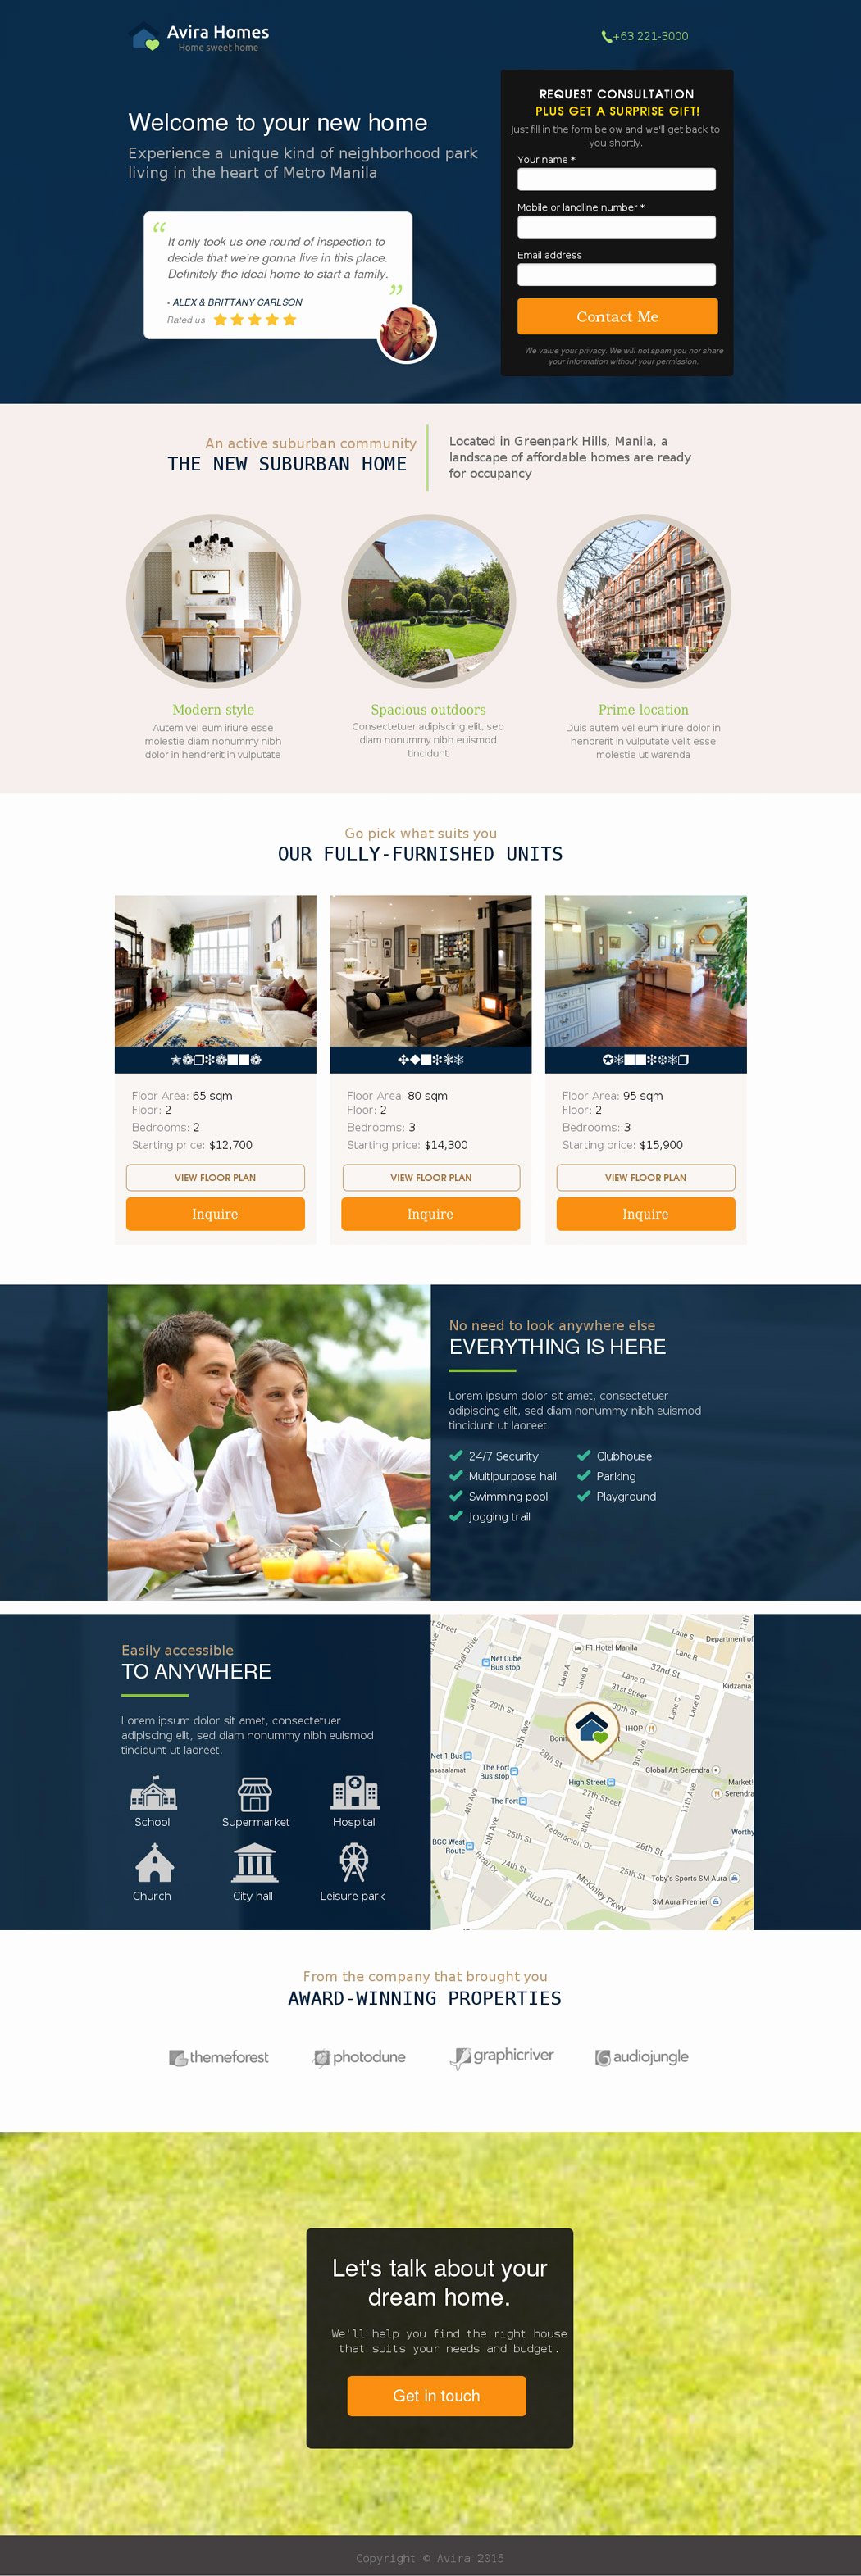 5 Real Estate Landing Page Templates for Your Appraisal